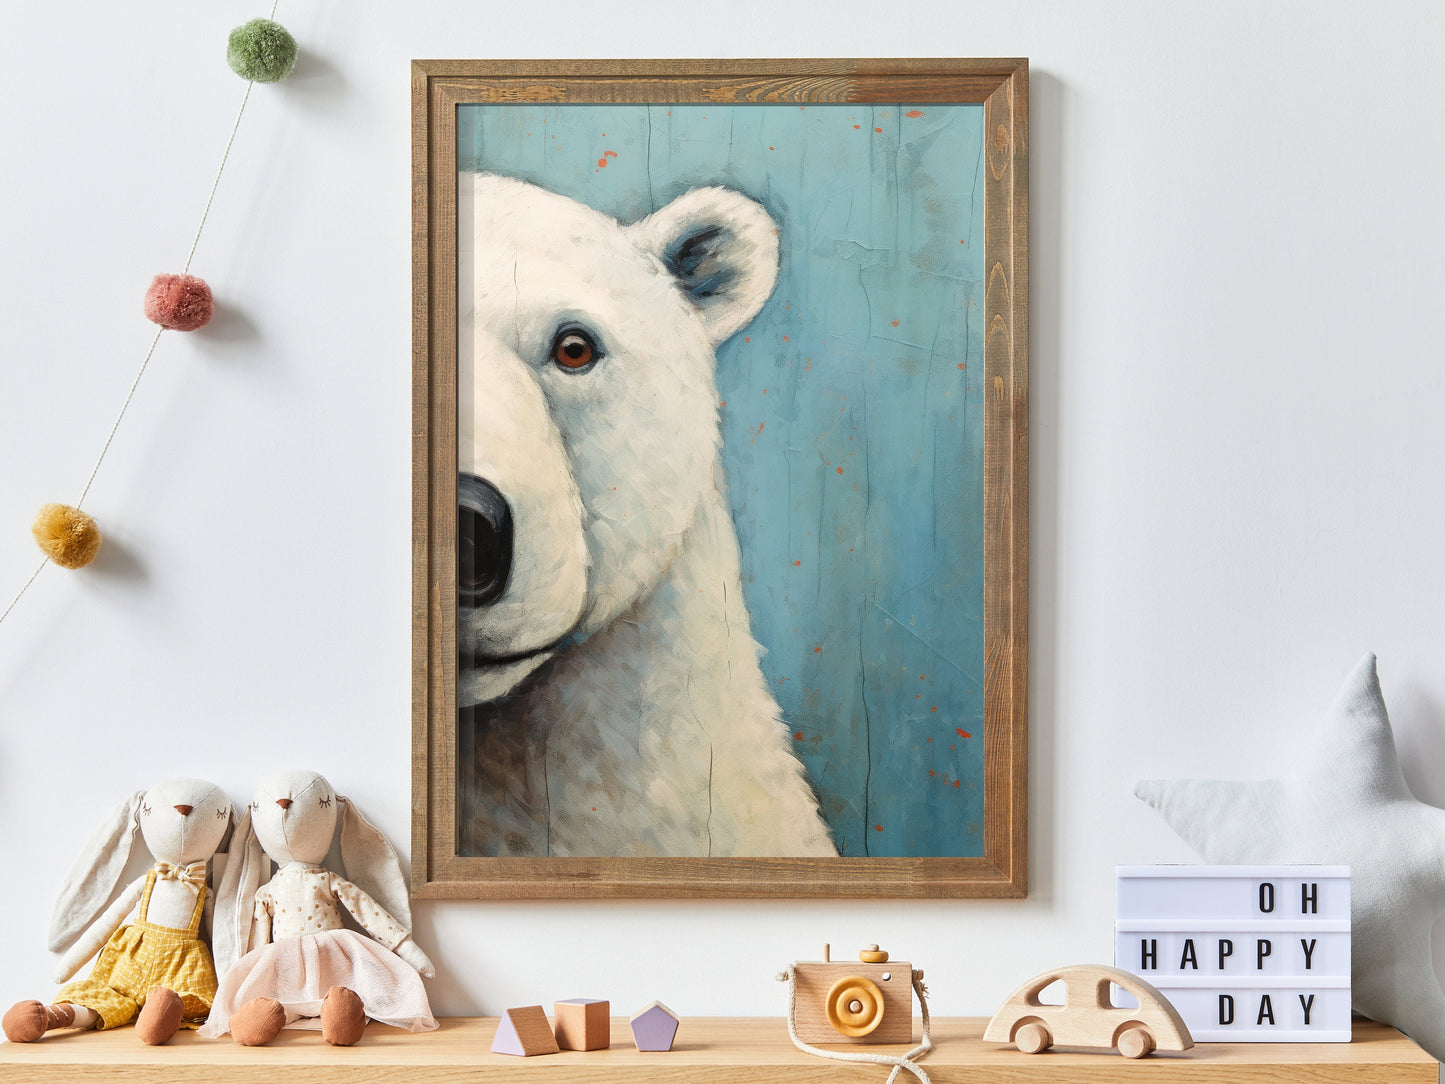 Bear Wall Art, Unique Vintage Polar Bear Animal Decor, Perfect for Nursery, Kids Room or Even Your Office, Rustic Gender Neutral Print